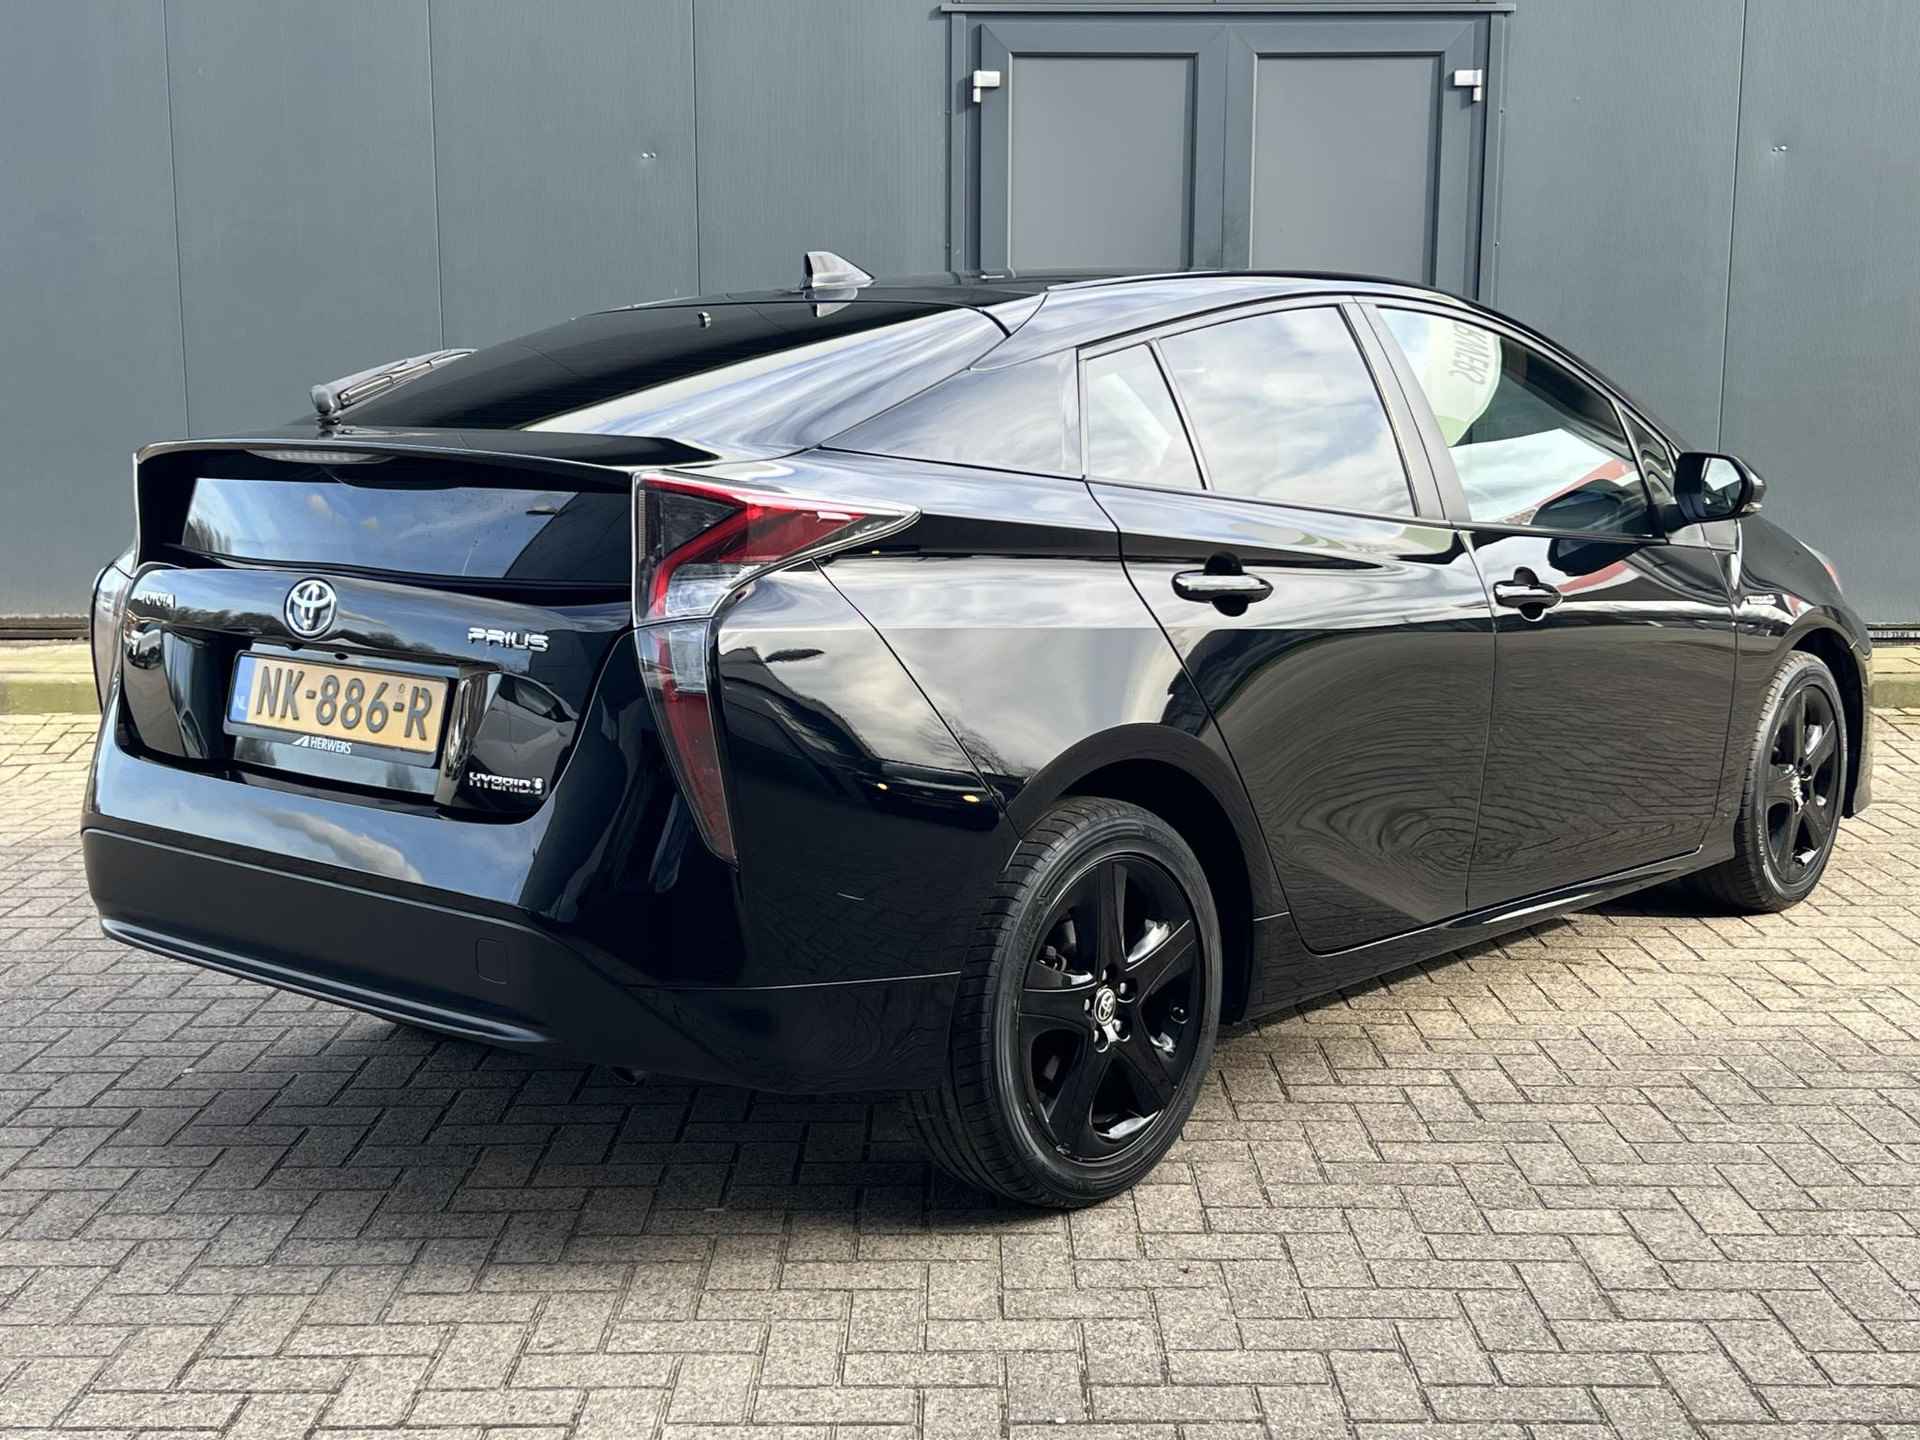 Toyota Prius 1.8 First Edition Automaat / Navigatie / Cruise Control / Climate Control / Stoelverwarming / DAB / Bluetooth / Head-Up Display / Dodehoek Herkenning / Camera - 3/30